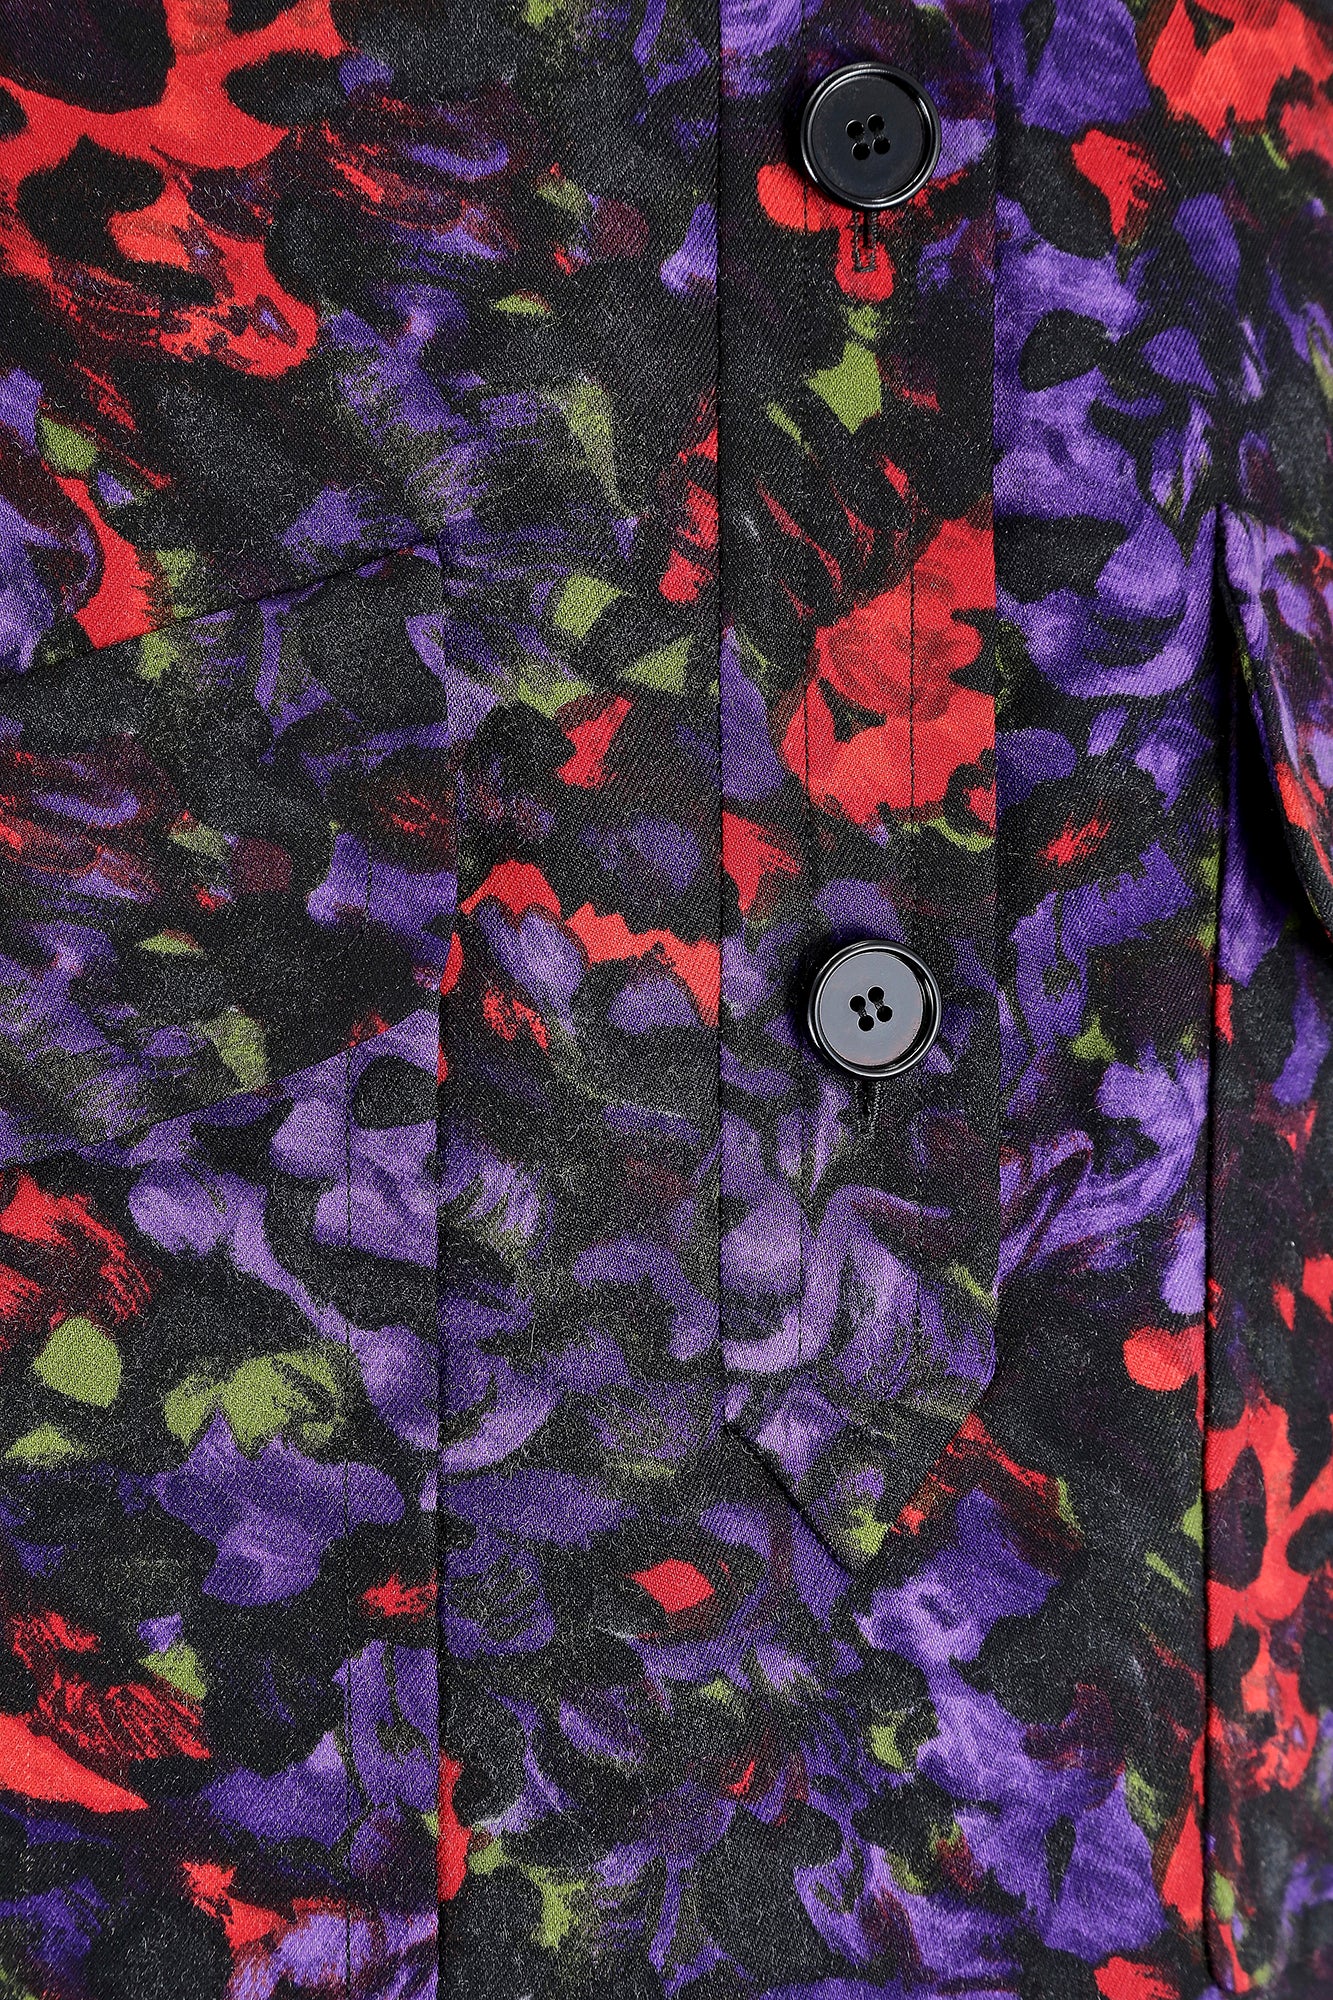 1980s Givenchy Boutique Abstract Floral Shirt Dress